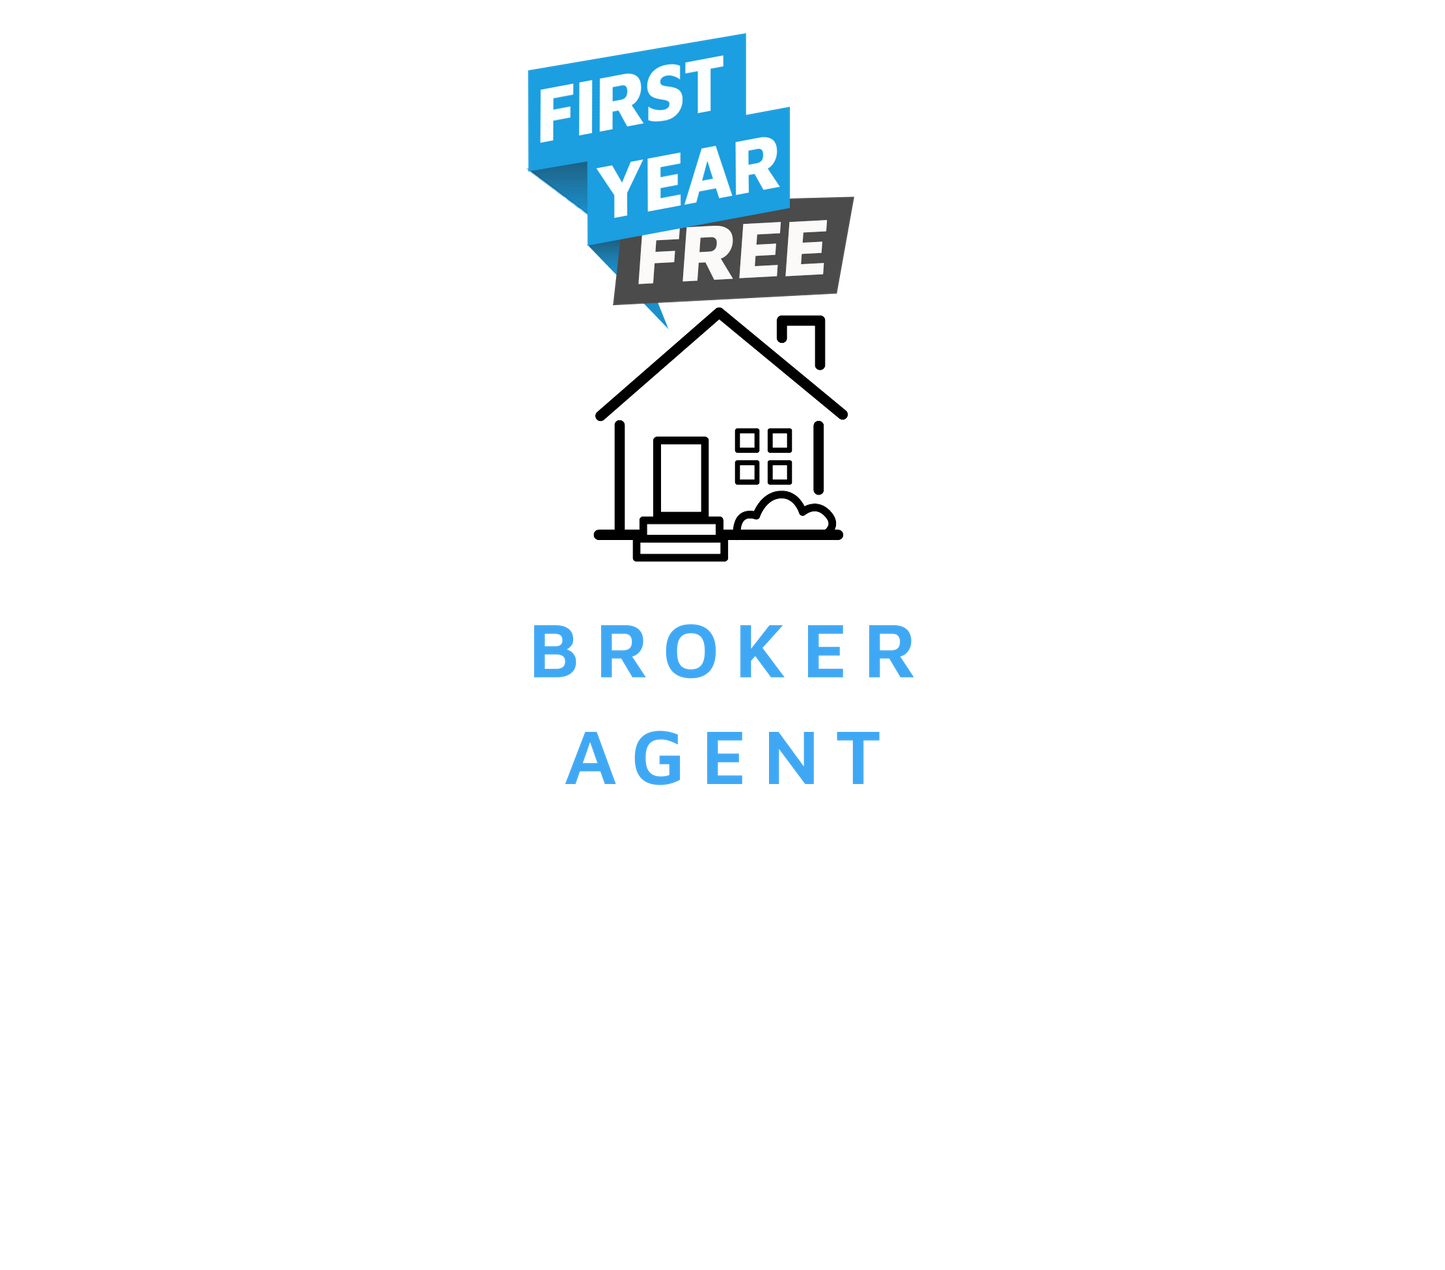 FIRST YEAR FREE - Broker Agent - use code ATA5